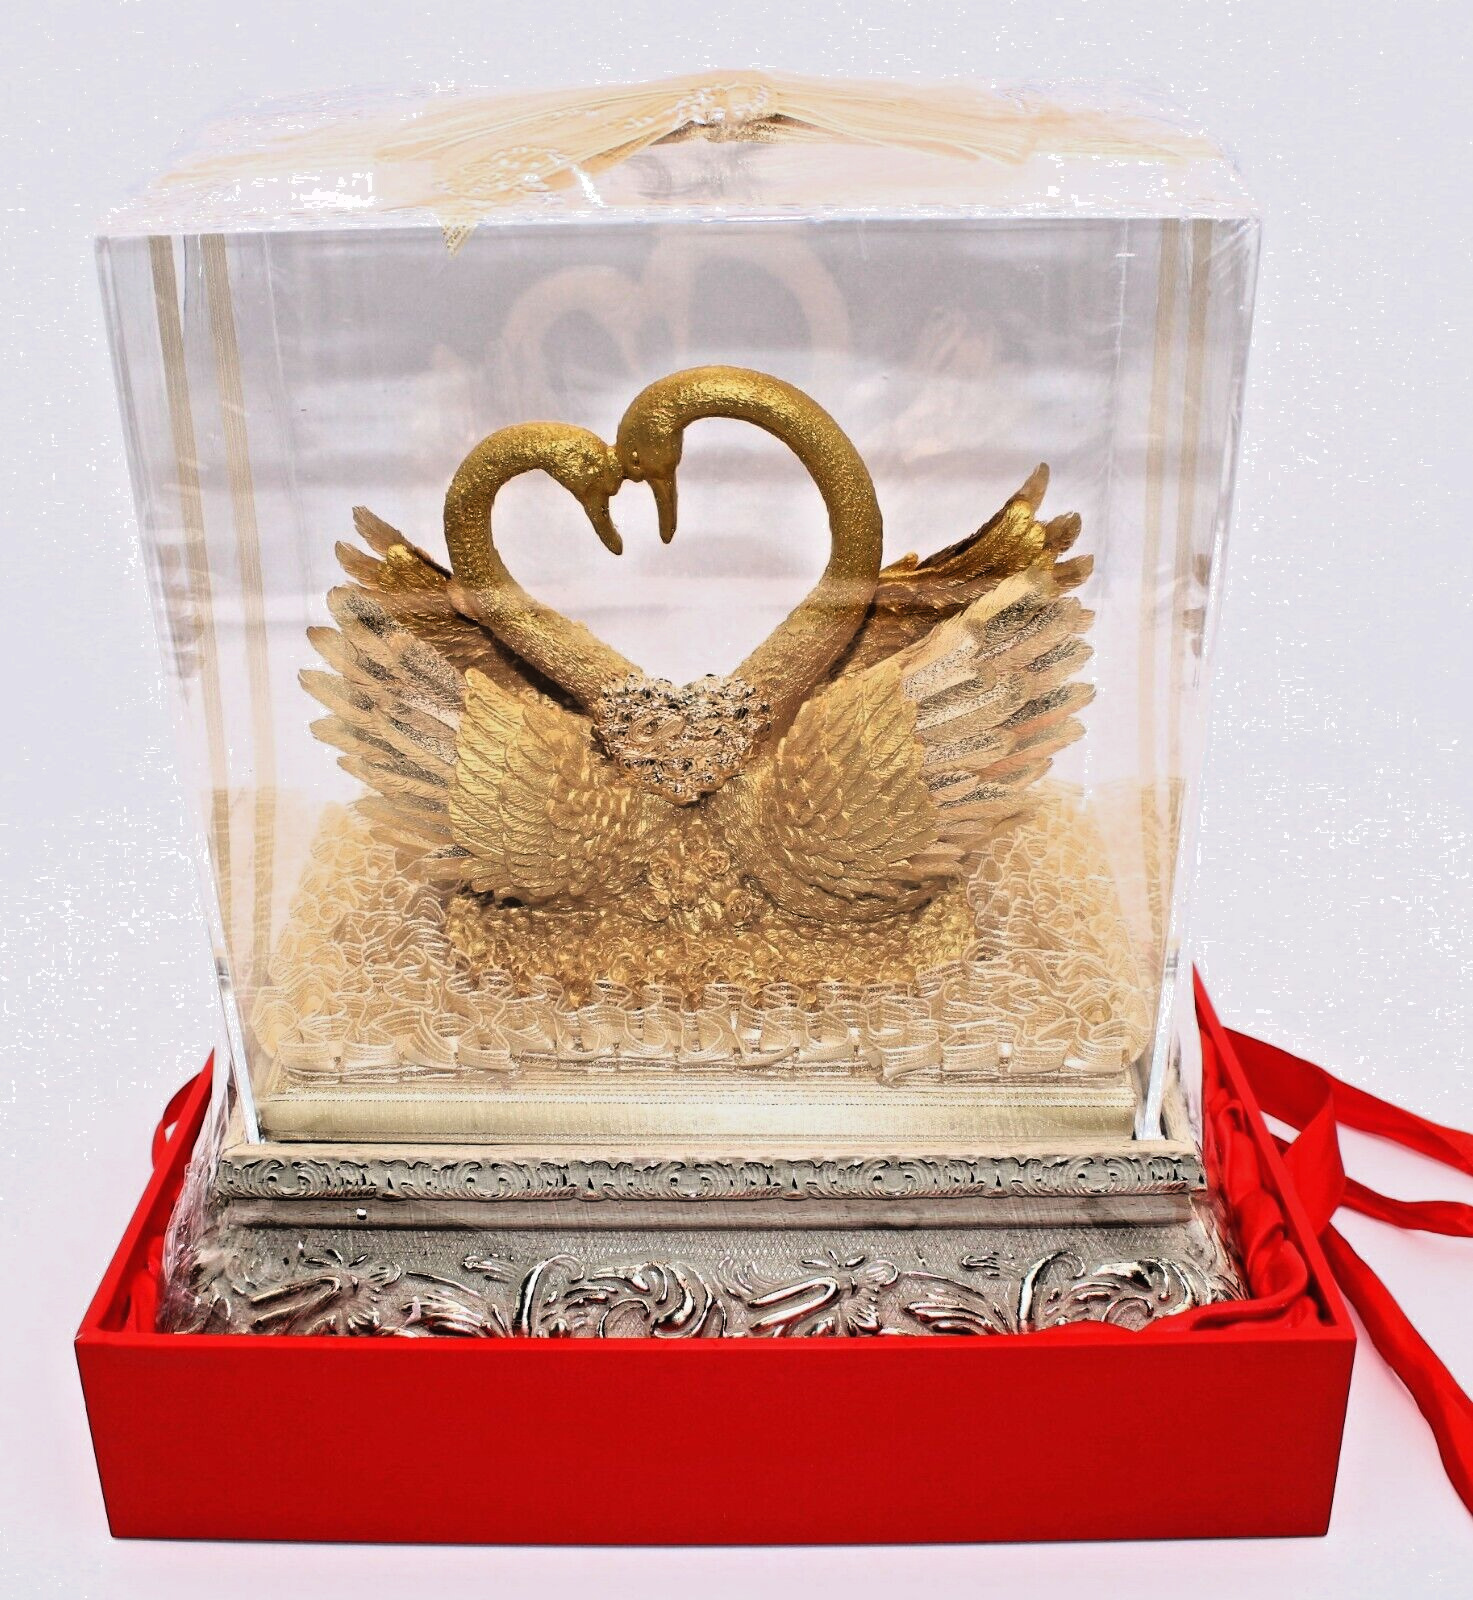 3D Gold Leaf Art,Gold Swan Love and Prosperity GDTC Certified Feng Shui Figurine